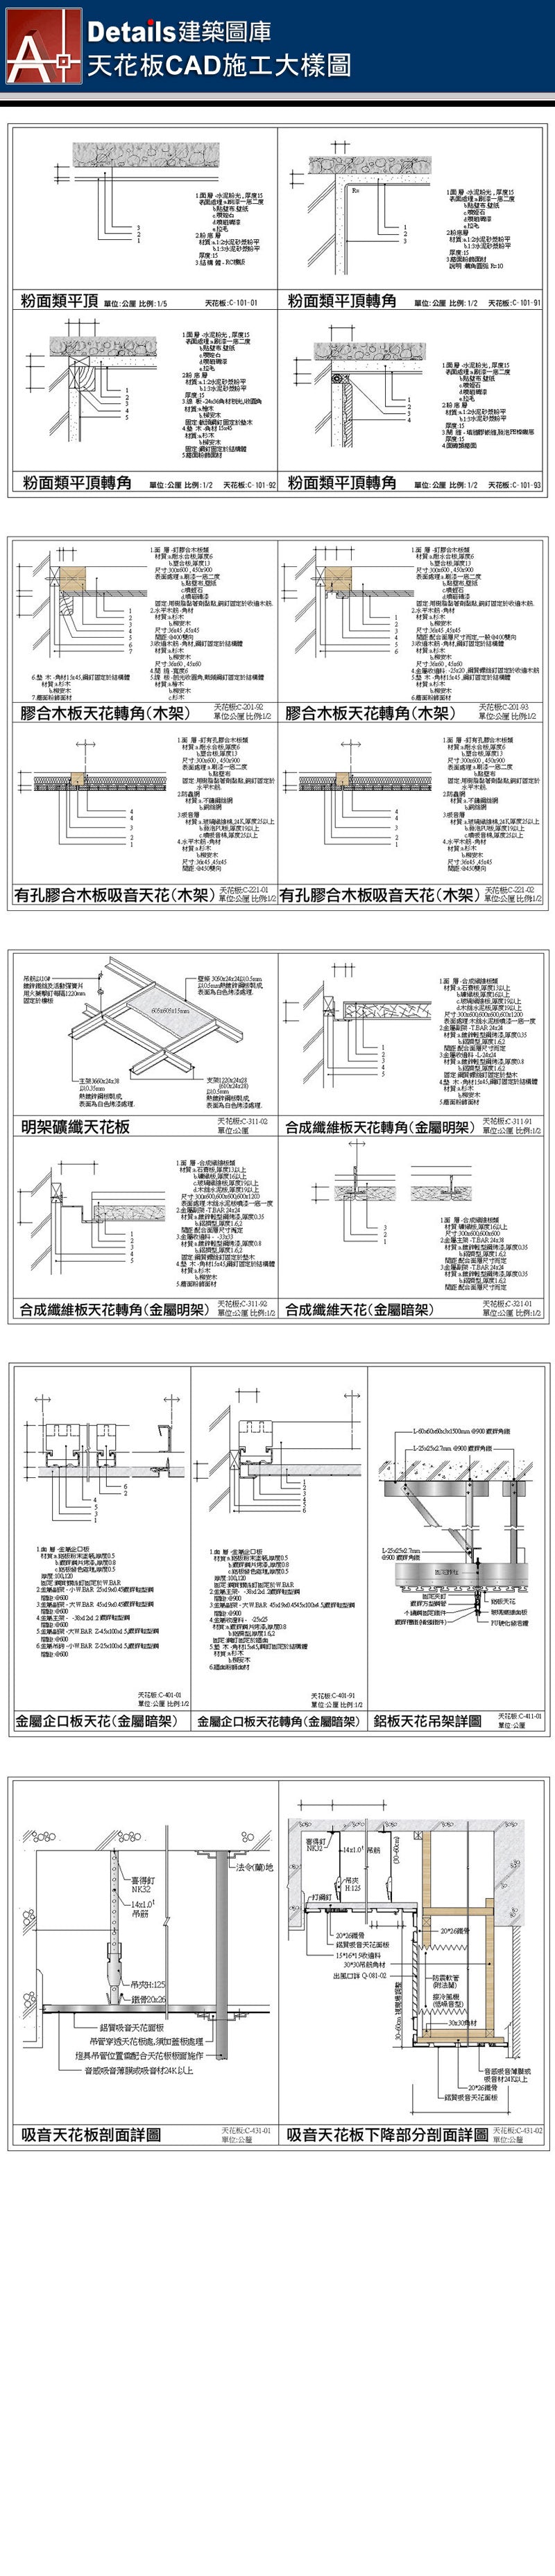 ★【Ceiling CAD Details Collections 天花板施工大樣合輯】Ceiling CAD Details Bundle天花板CAD施工大樣圖